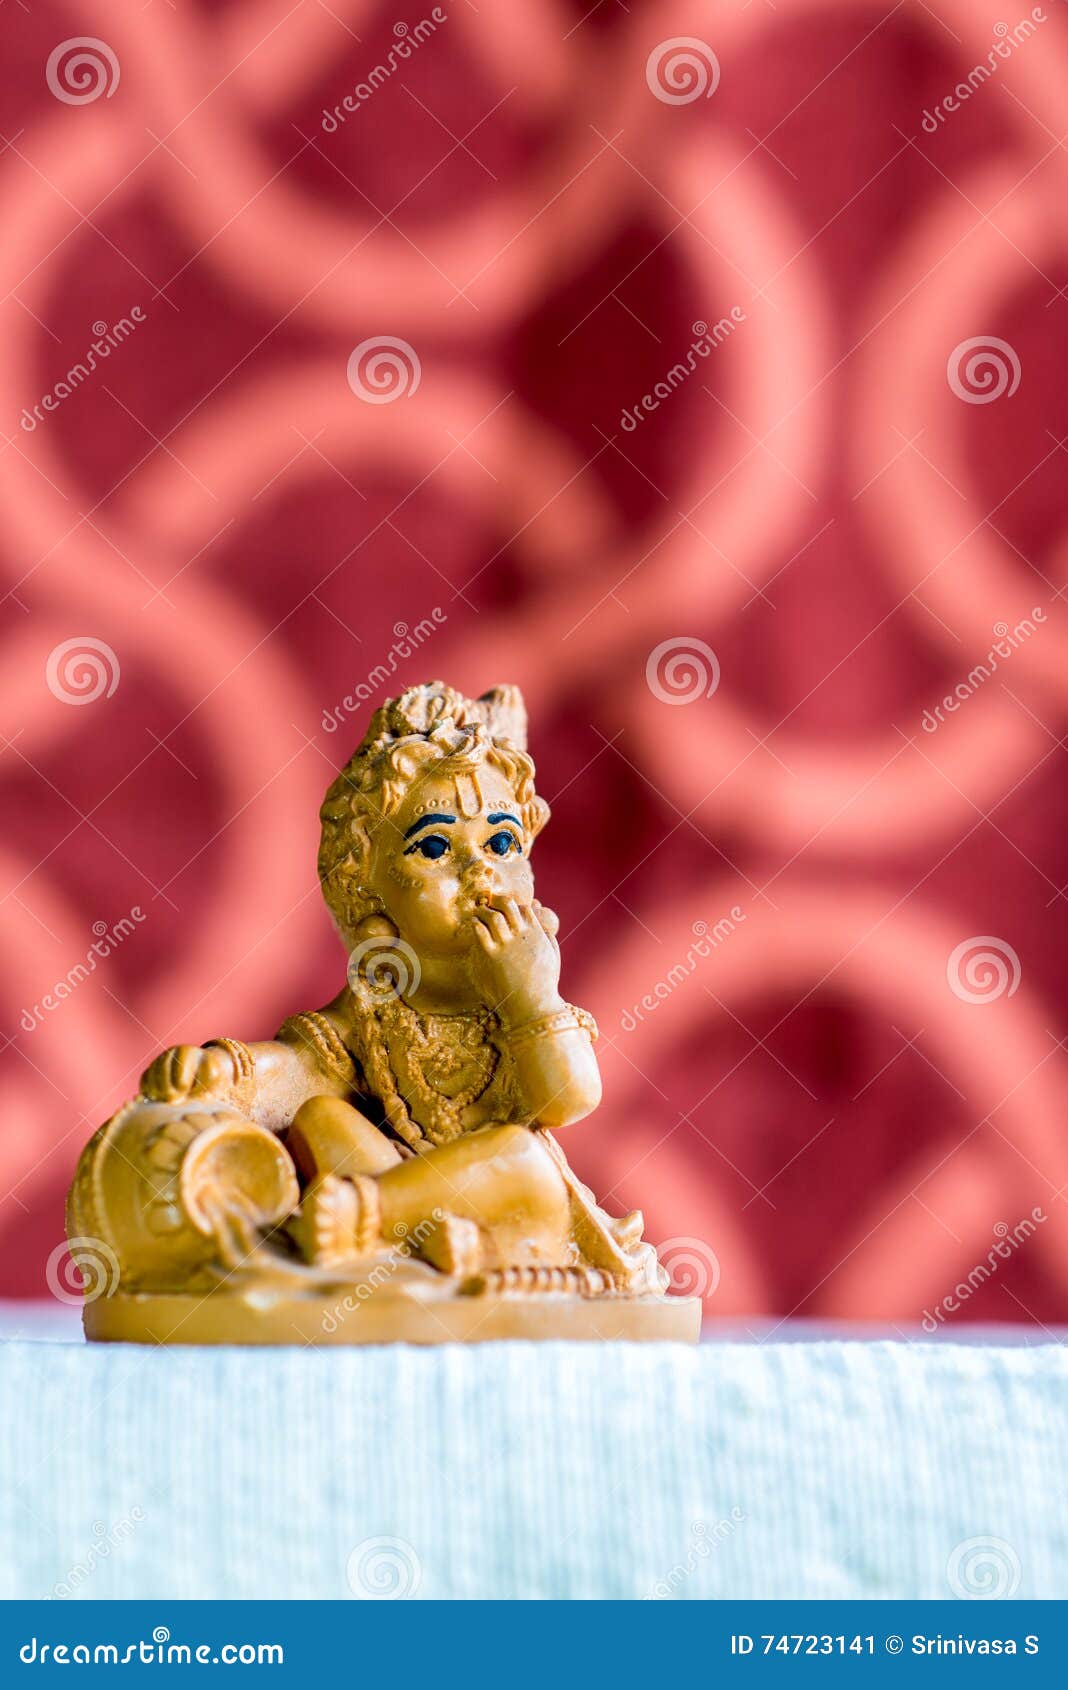 Idol of Lord Krishna in His Childhood Form Stock Image - Image of ...